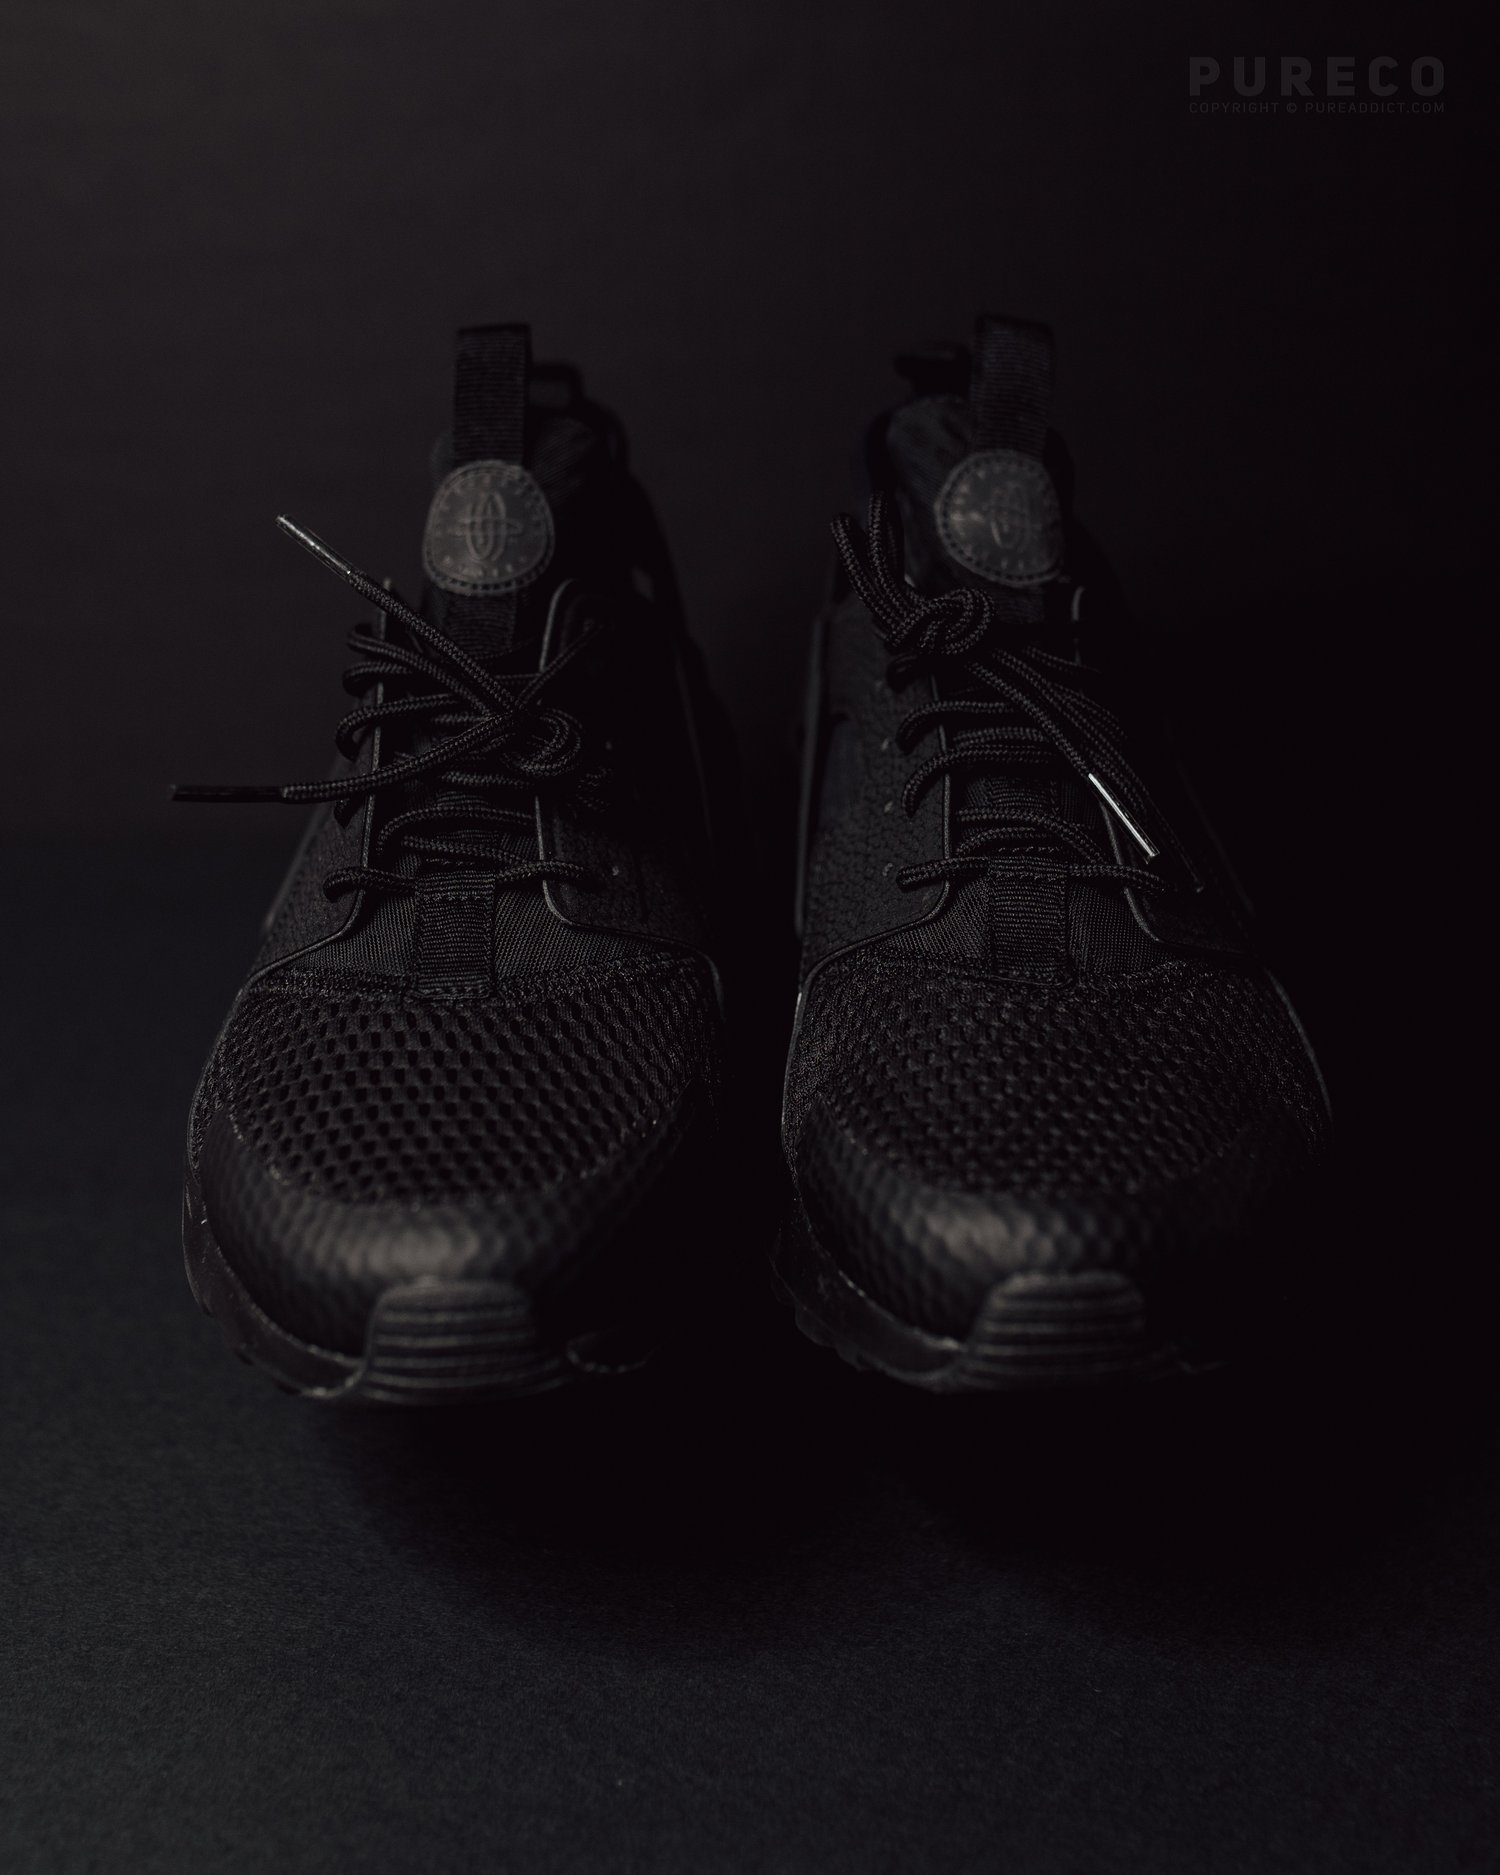 The Nike Air Huarache Ultra Is Also Available In Triple Black